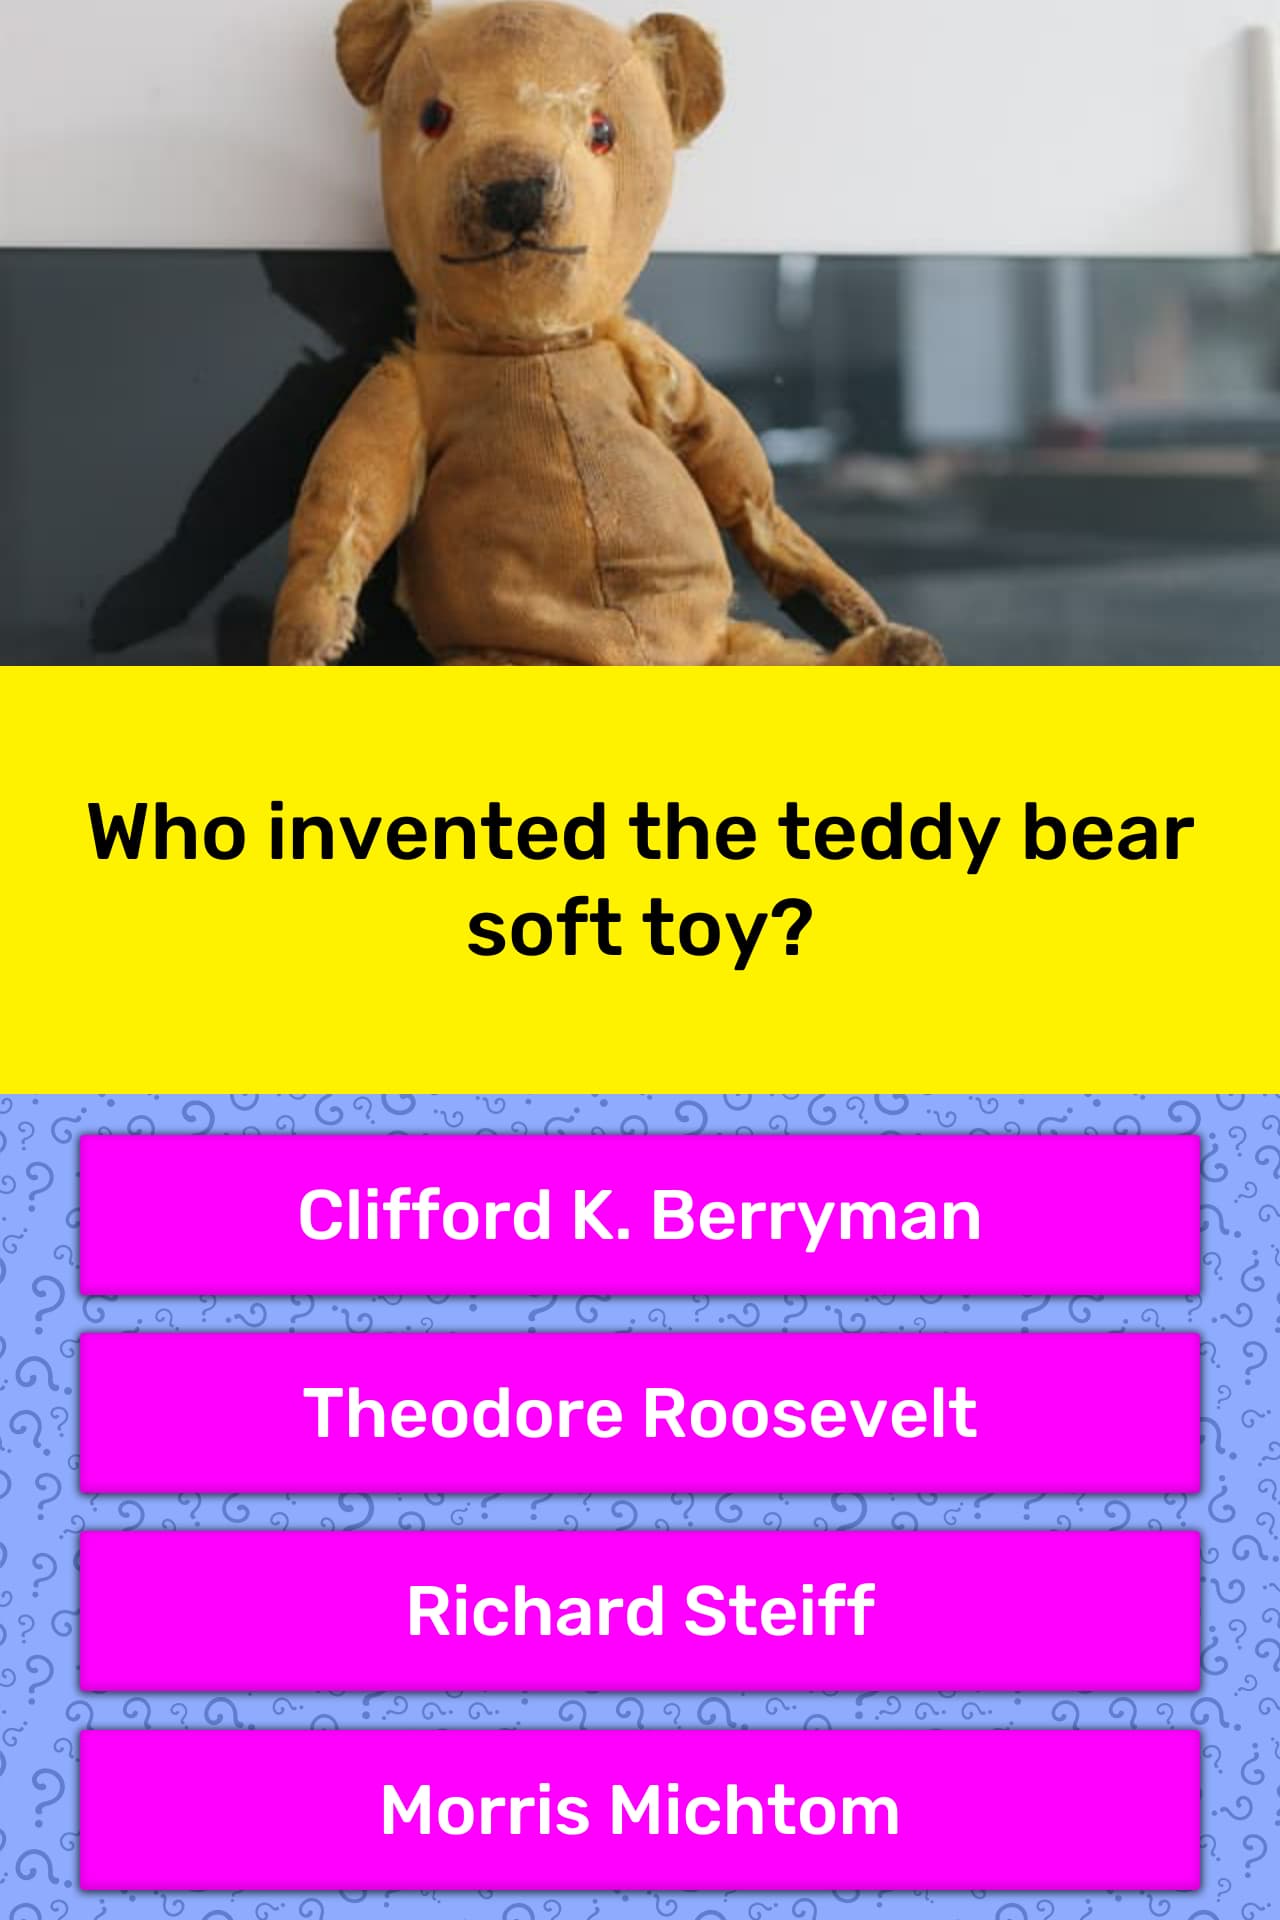 toy named after theodore roosevelt